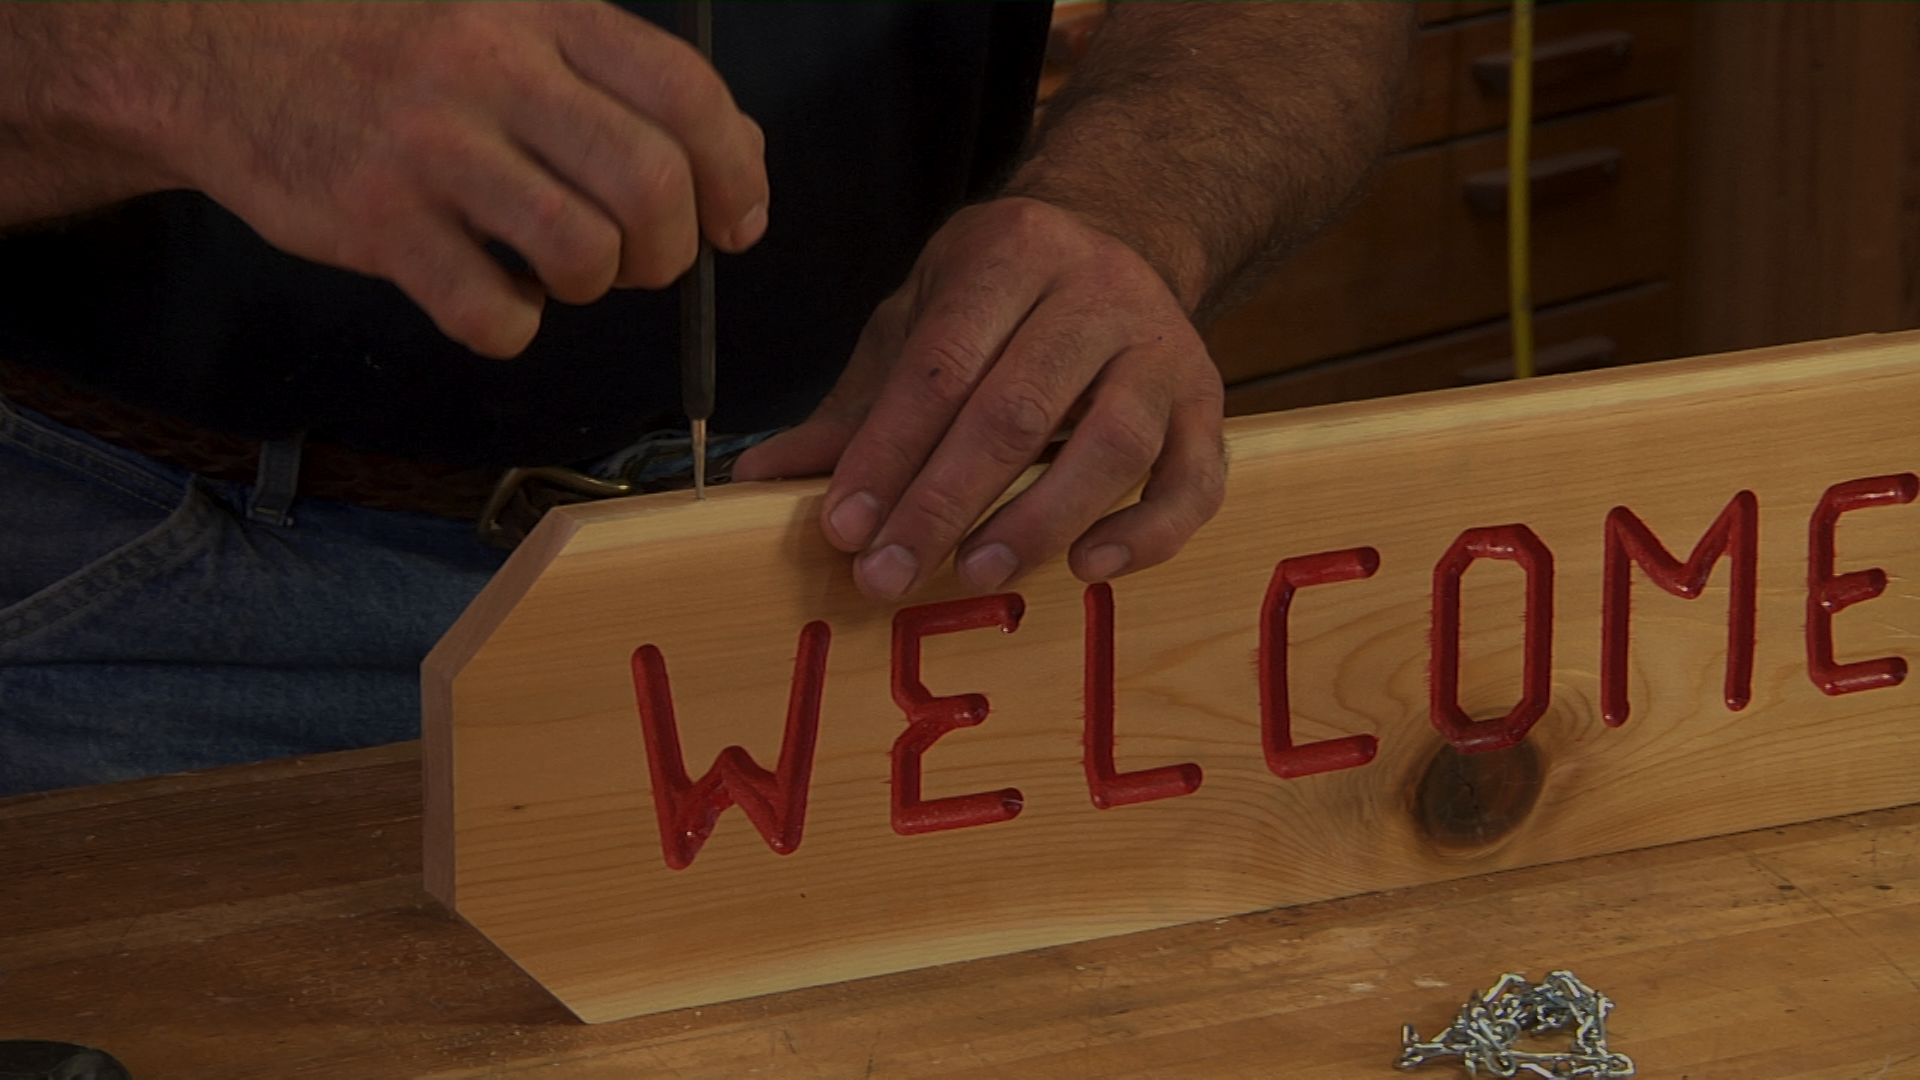 Putting a screw in a wooden welcome sign